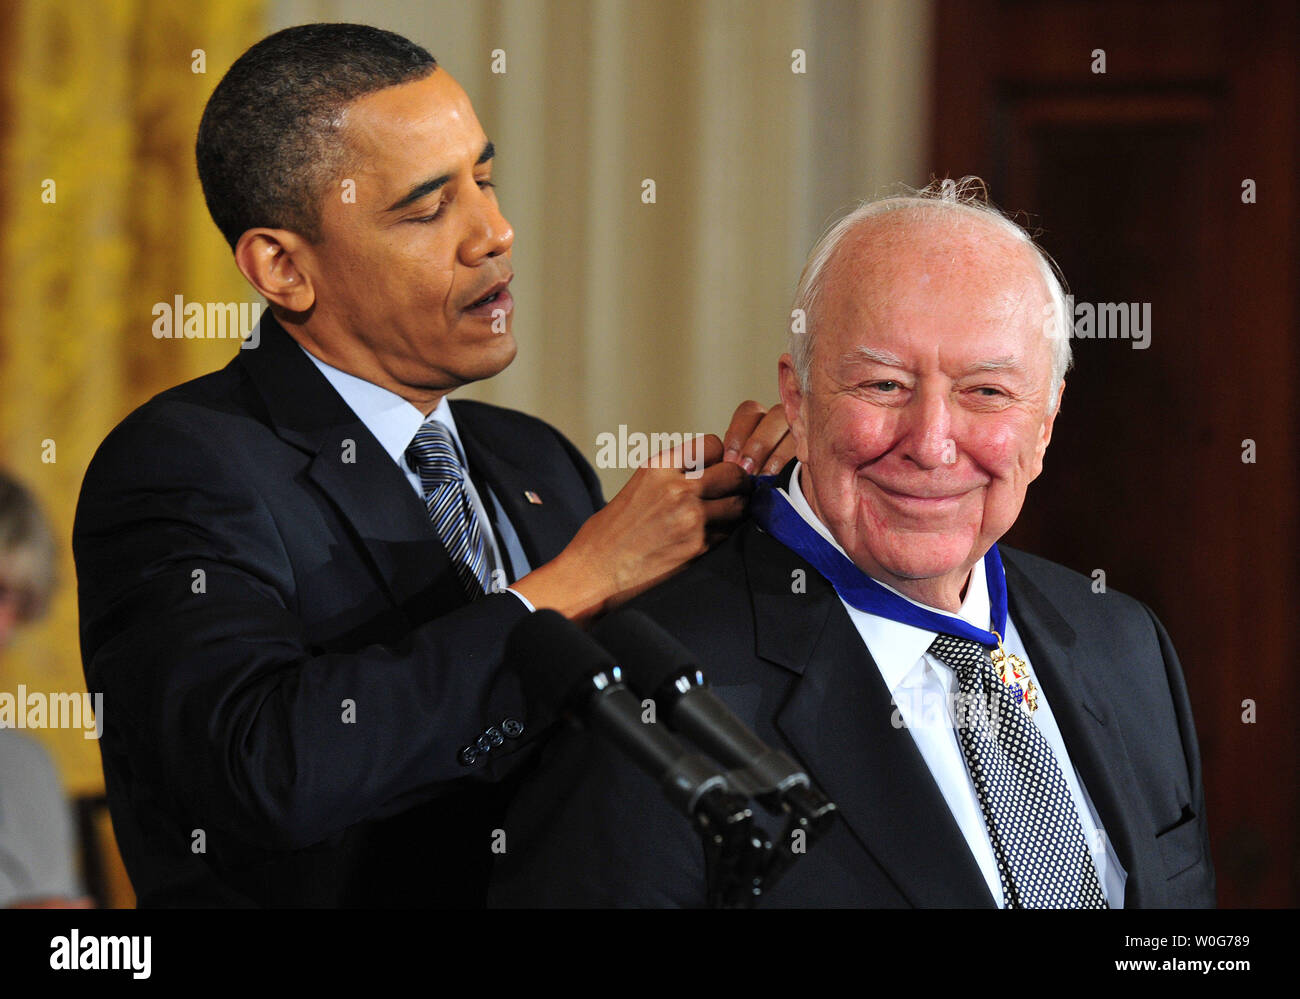 President Barack Obama awards the 2010 Presidential Medal of Freedom to artist Jasper Johns during a ceremony at the White House in Washington on February 15, 2011.  UPI/Kevin Dietsch Stock Photo